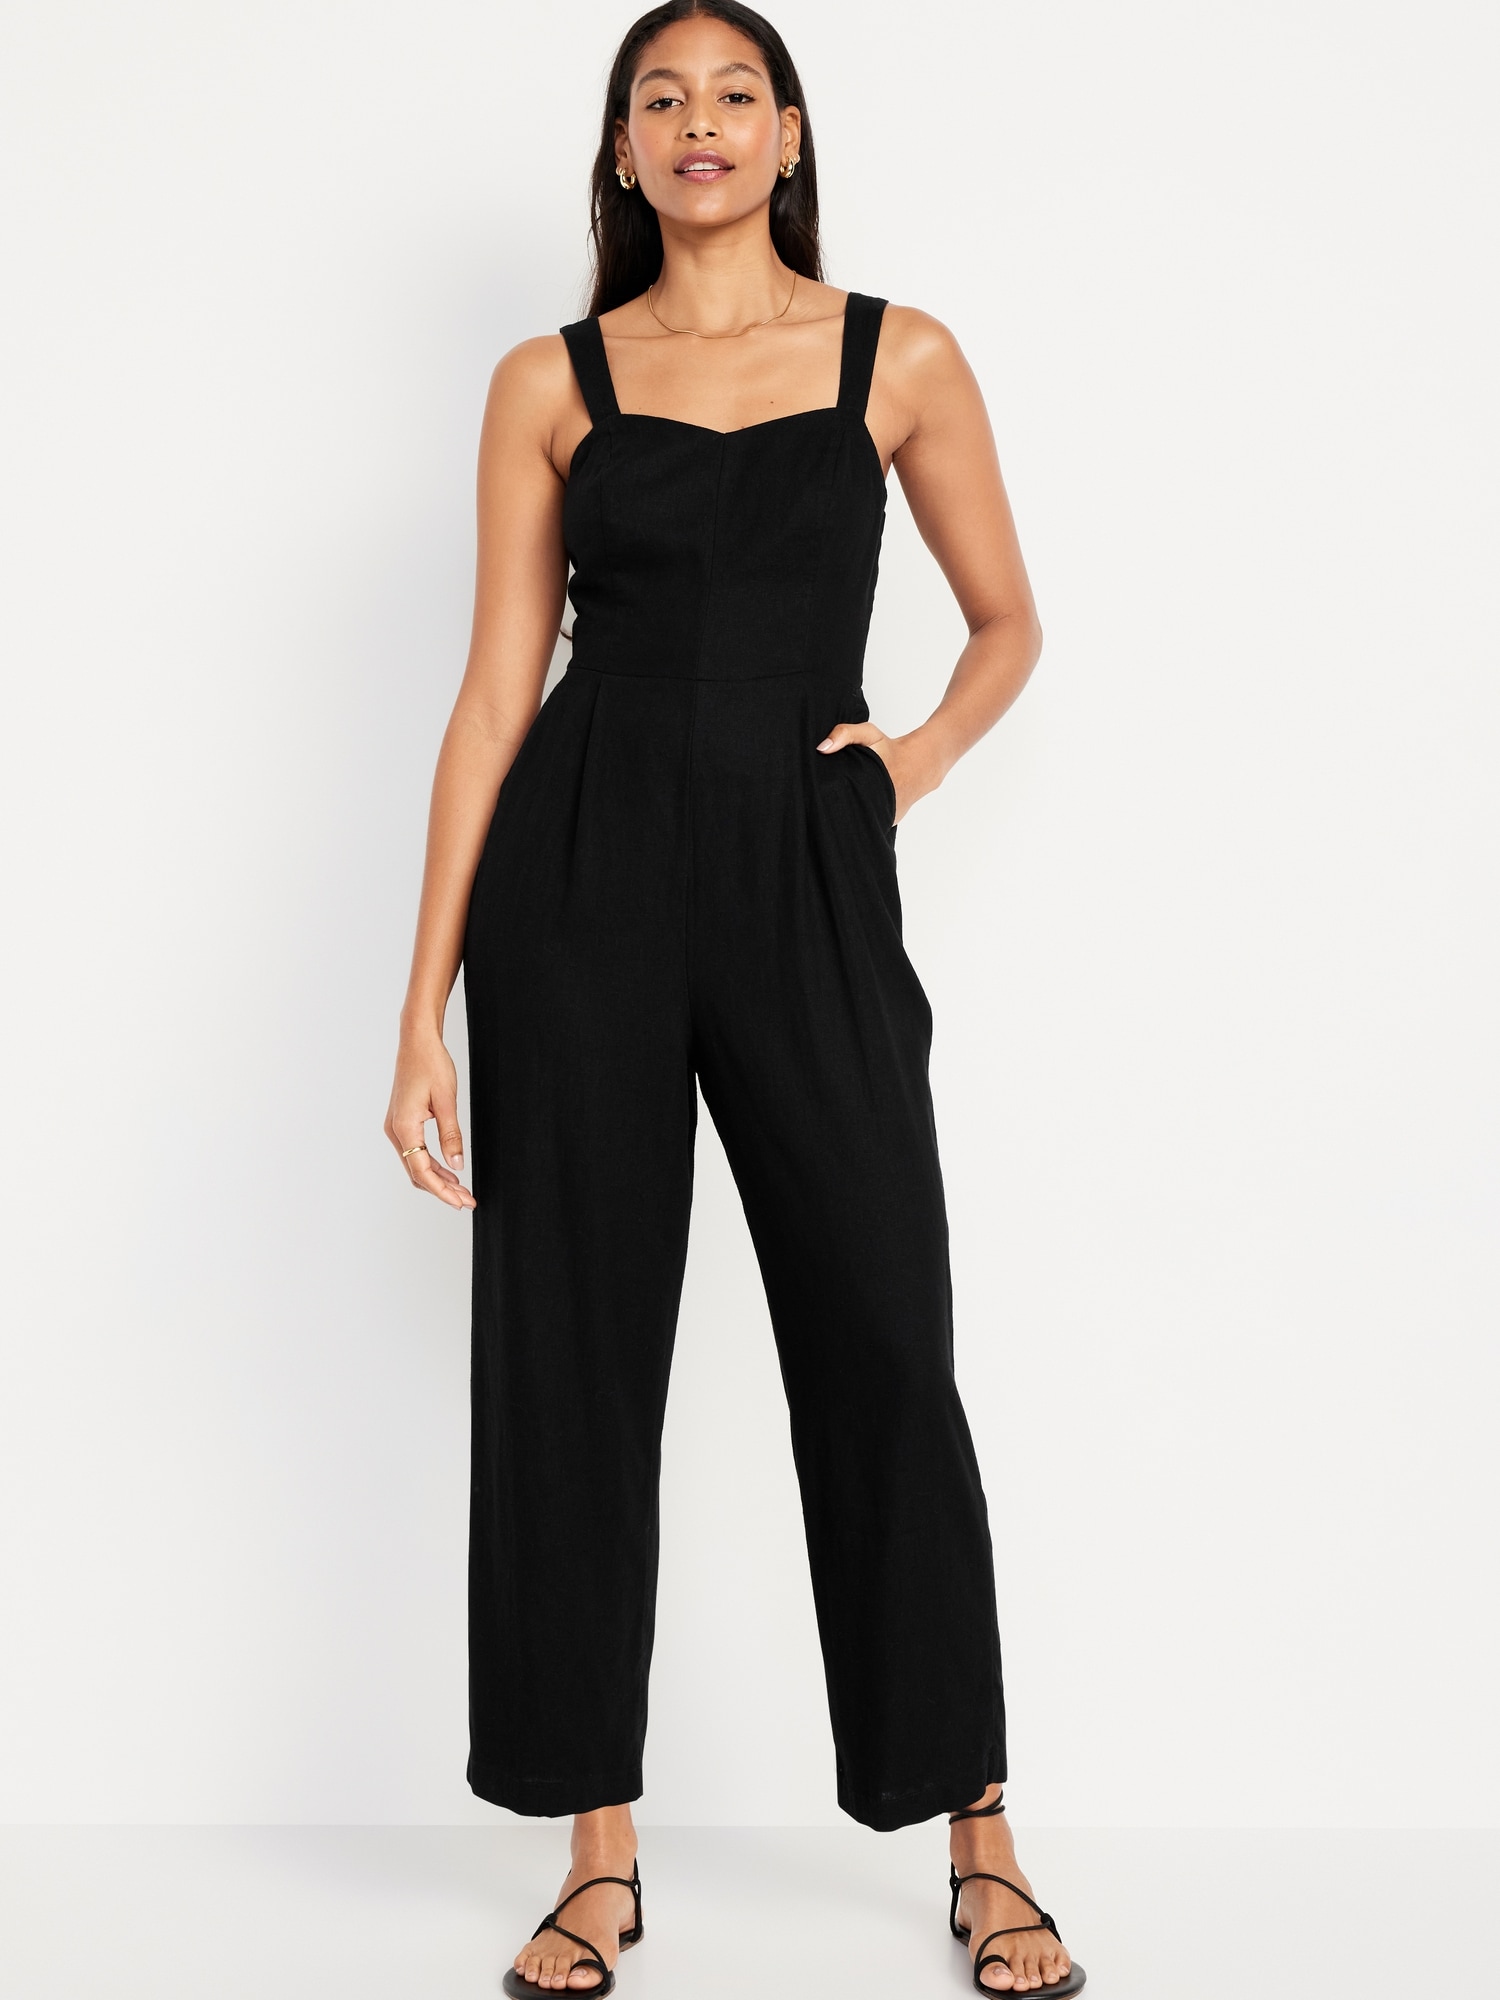 Aayomet Petite Jumpsuits for Women Womens Casual Loose Sleeveless